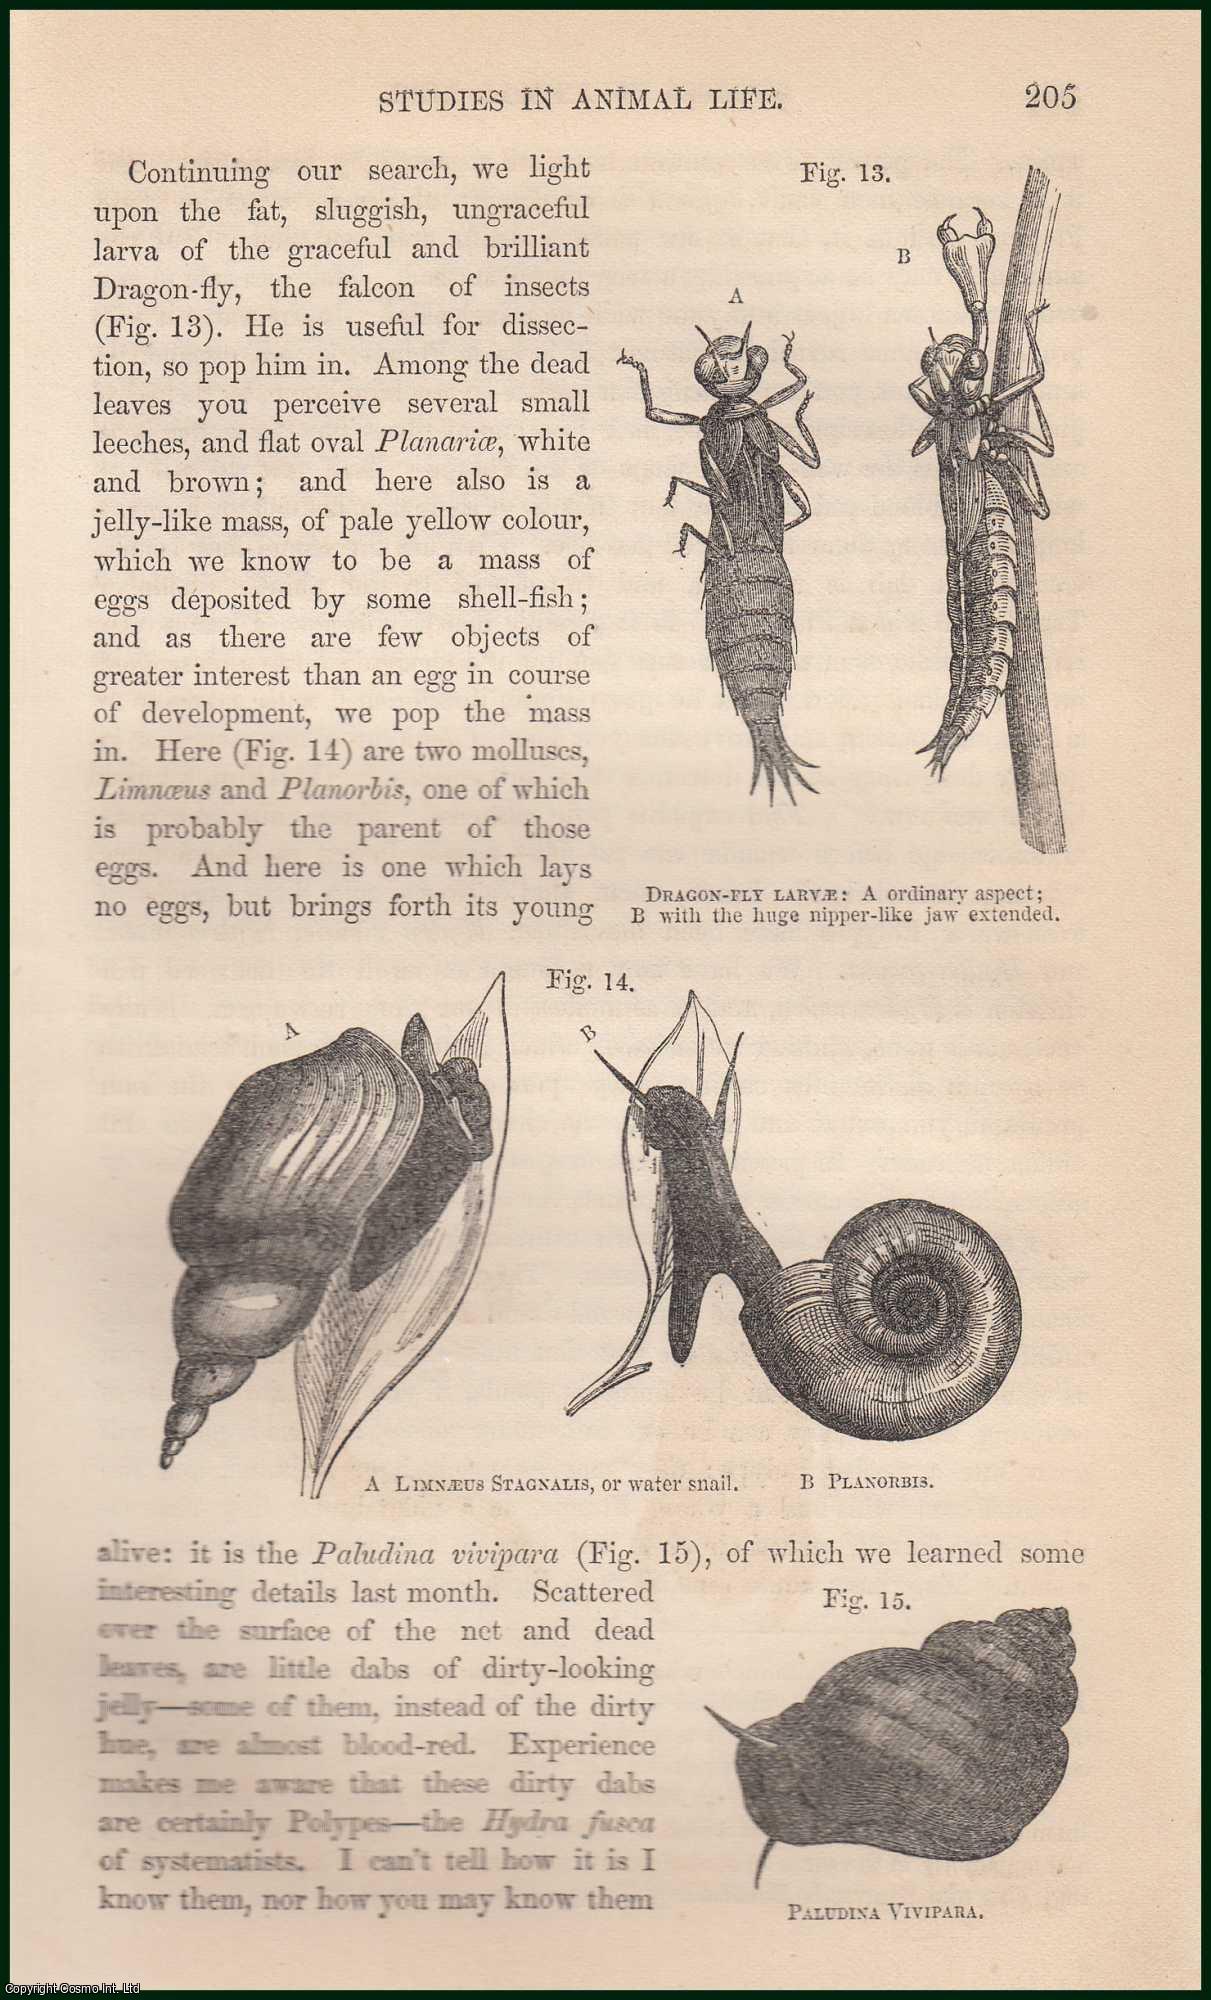 G.H. Lewes - Studies in Animal Life (part 2). An uncommon original article from the Cornhill Magazine, 1860.